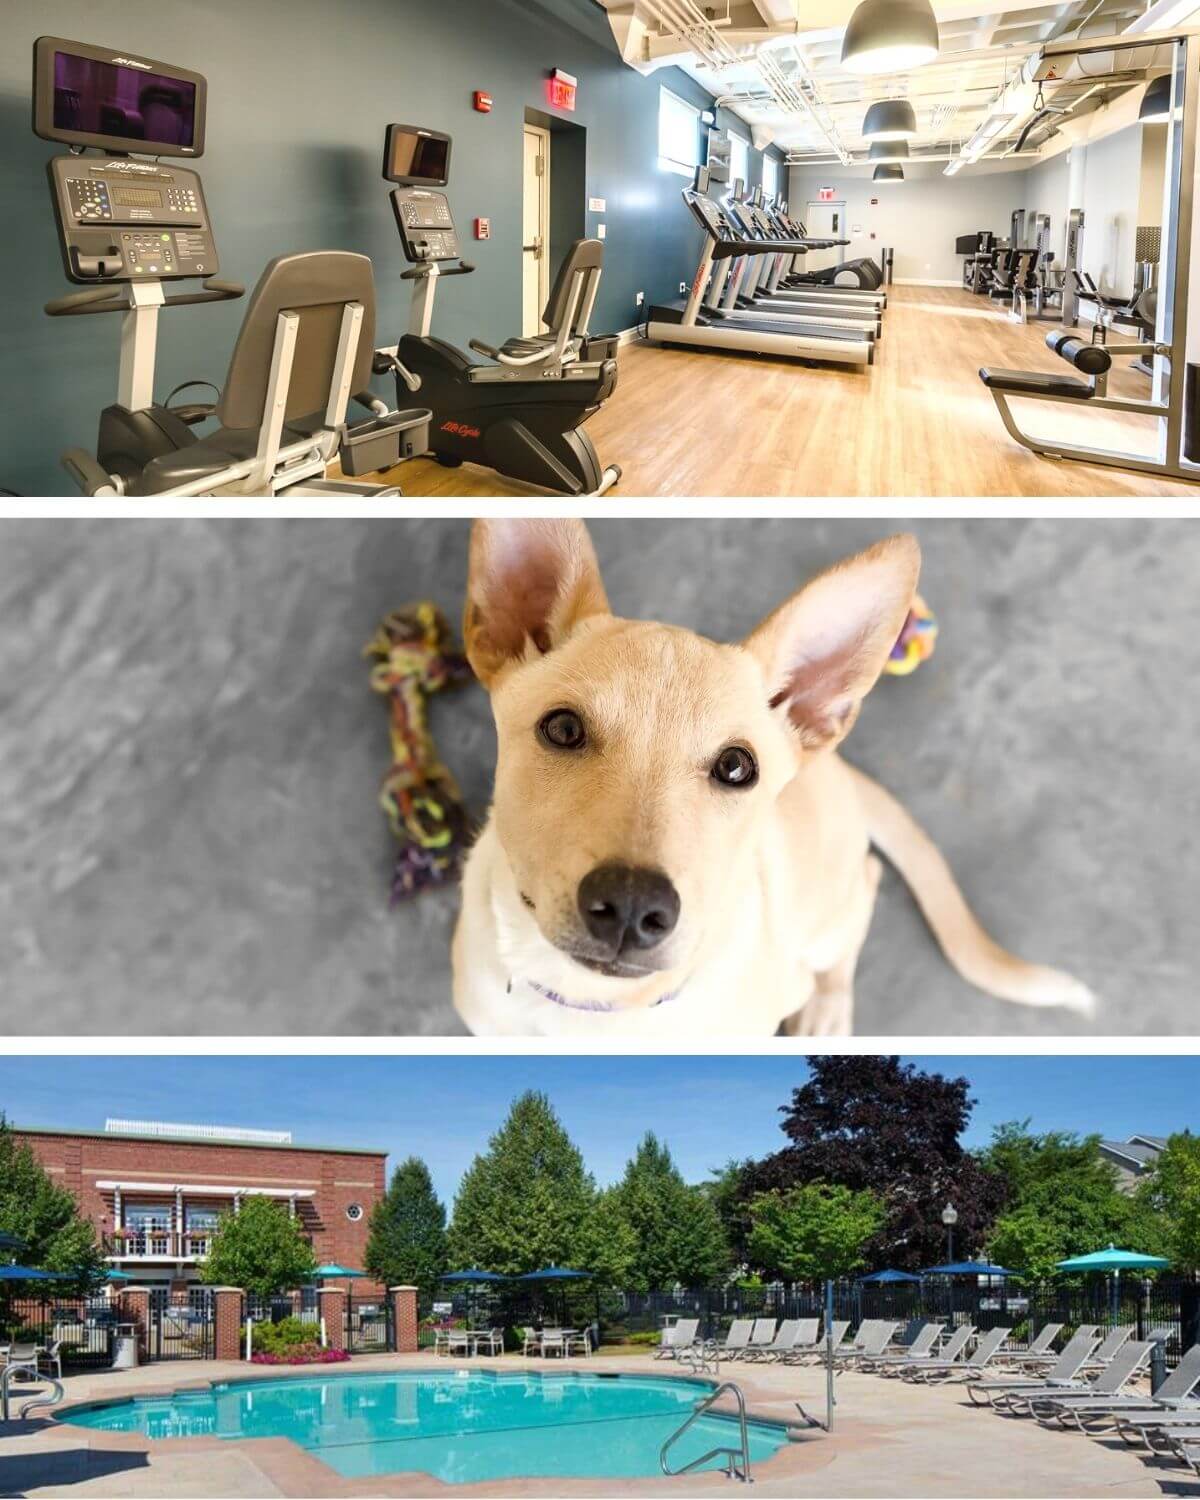 View of gym with equipment, swimming pool and dog.